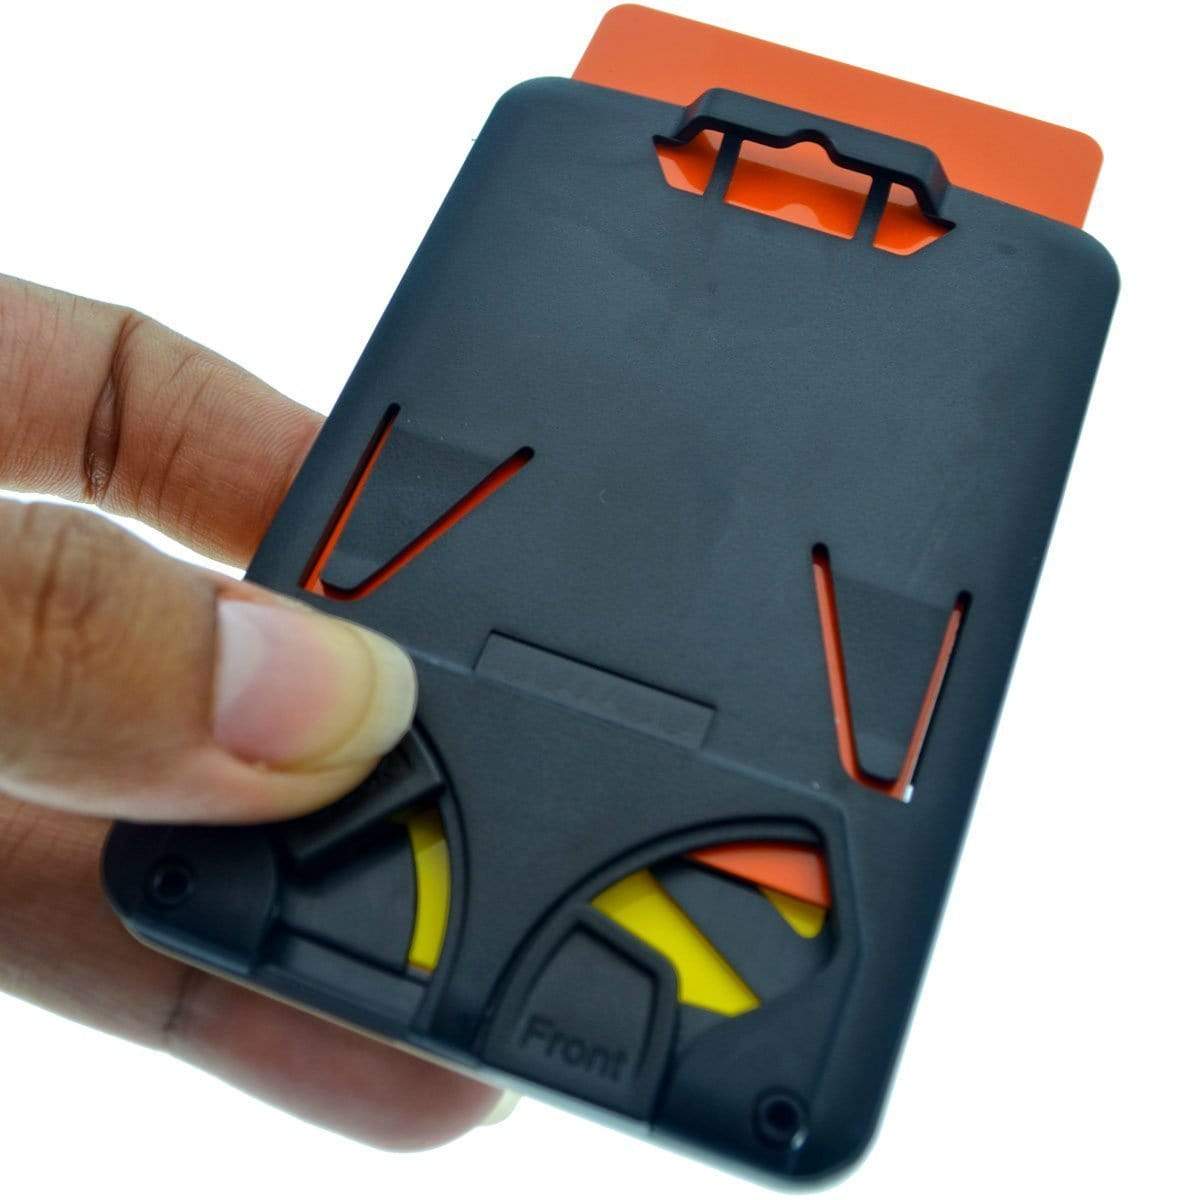 A person holds a Top Loading THREE ID Card Badge Holder with Heavy Duty Lanyard w/ Detachable Metal Clip and Key Ring by Specialist ID, a black and orange wallet-sized multitool with various functions, including slots and components for different tools. Integrated seamlessly, it also features a badge holder for ID cards.